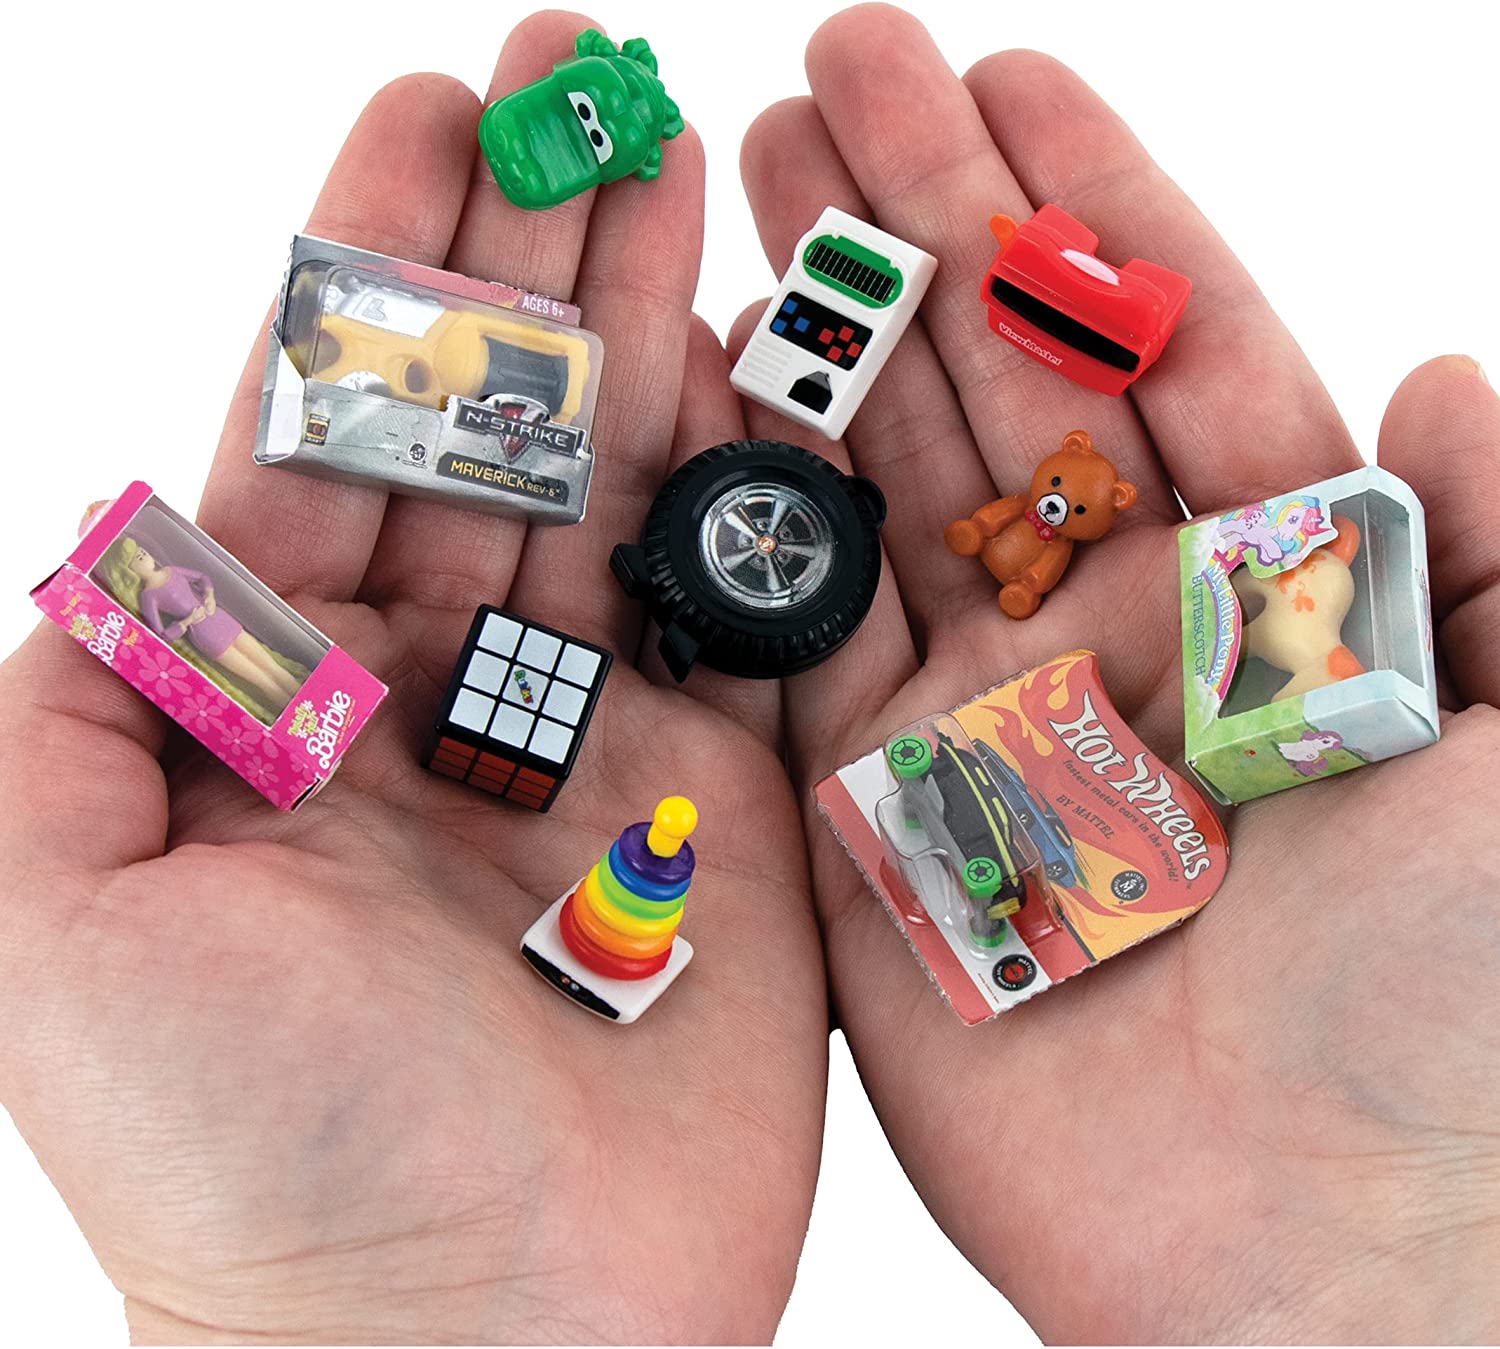 Micro Toy Box 10 Pack Series 1